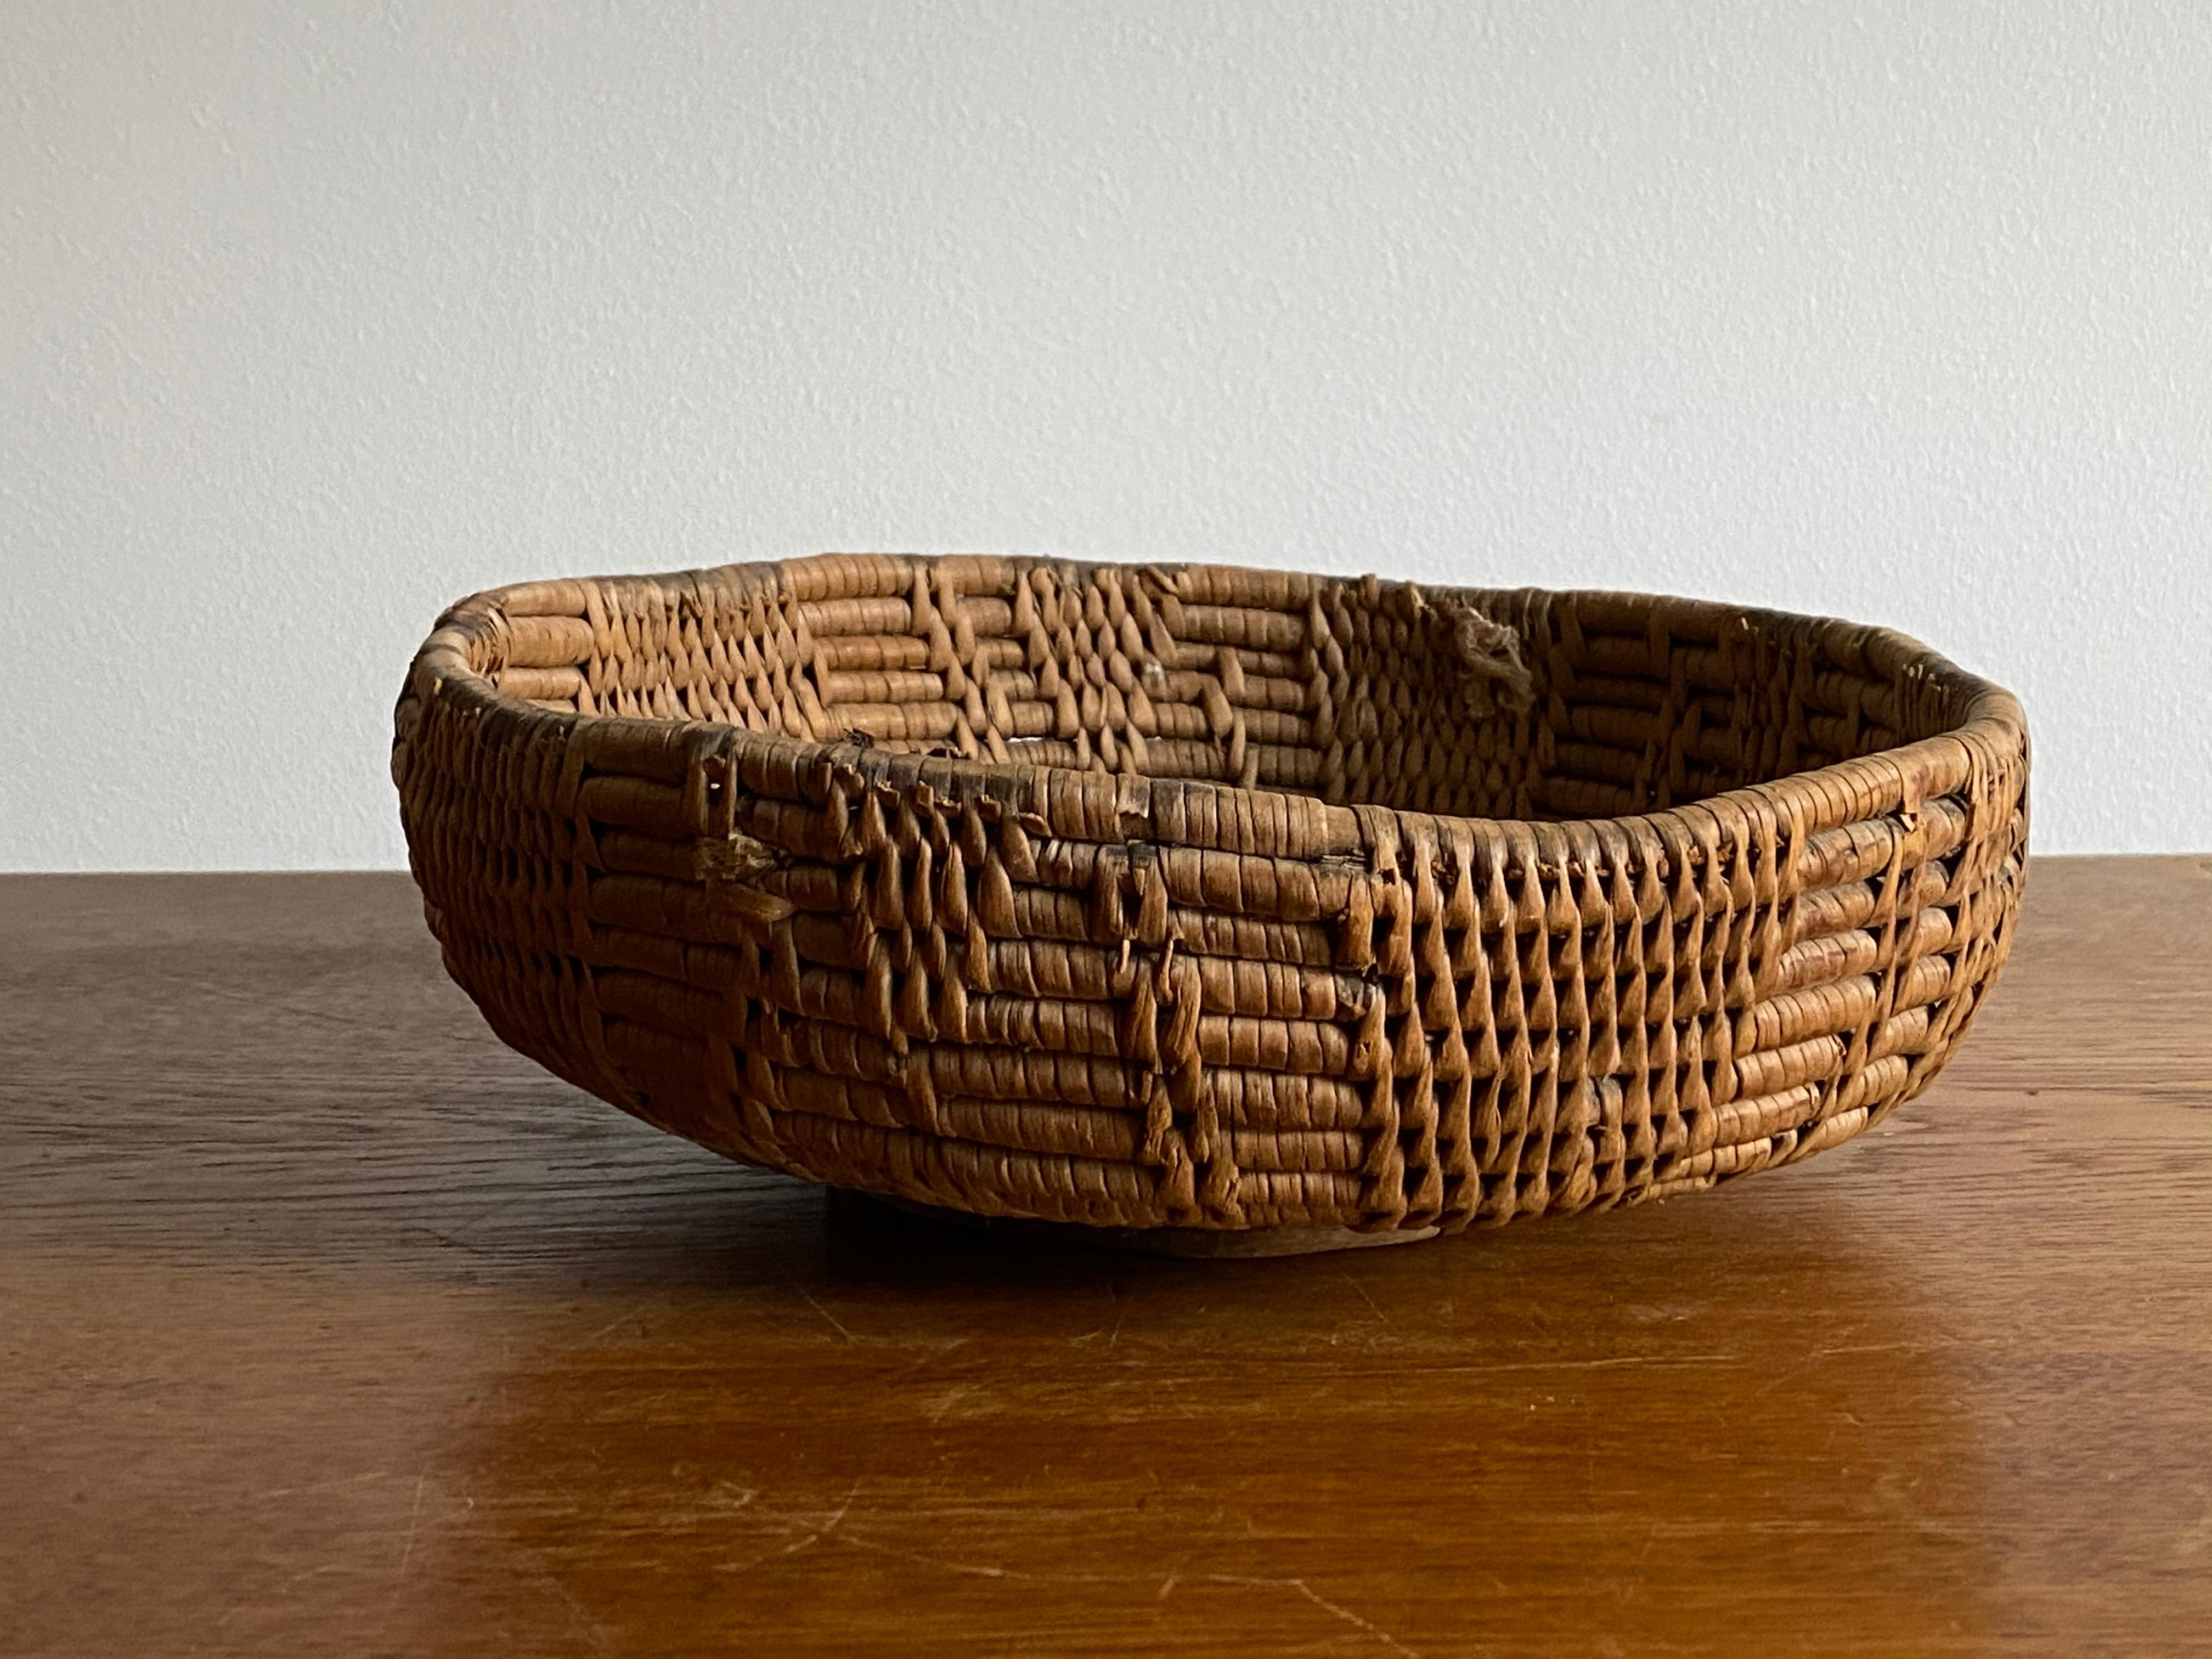 A handwoven basket or decorative bowl. Likely utilized as a form for cheese originally. Produced in Sweden, 19th century. In woven fir root.